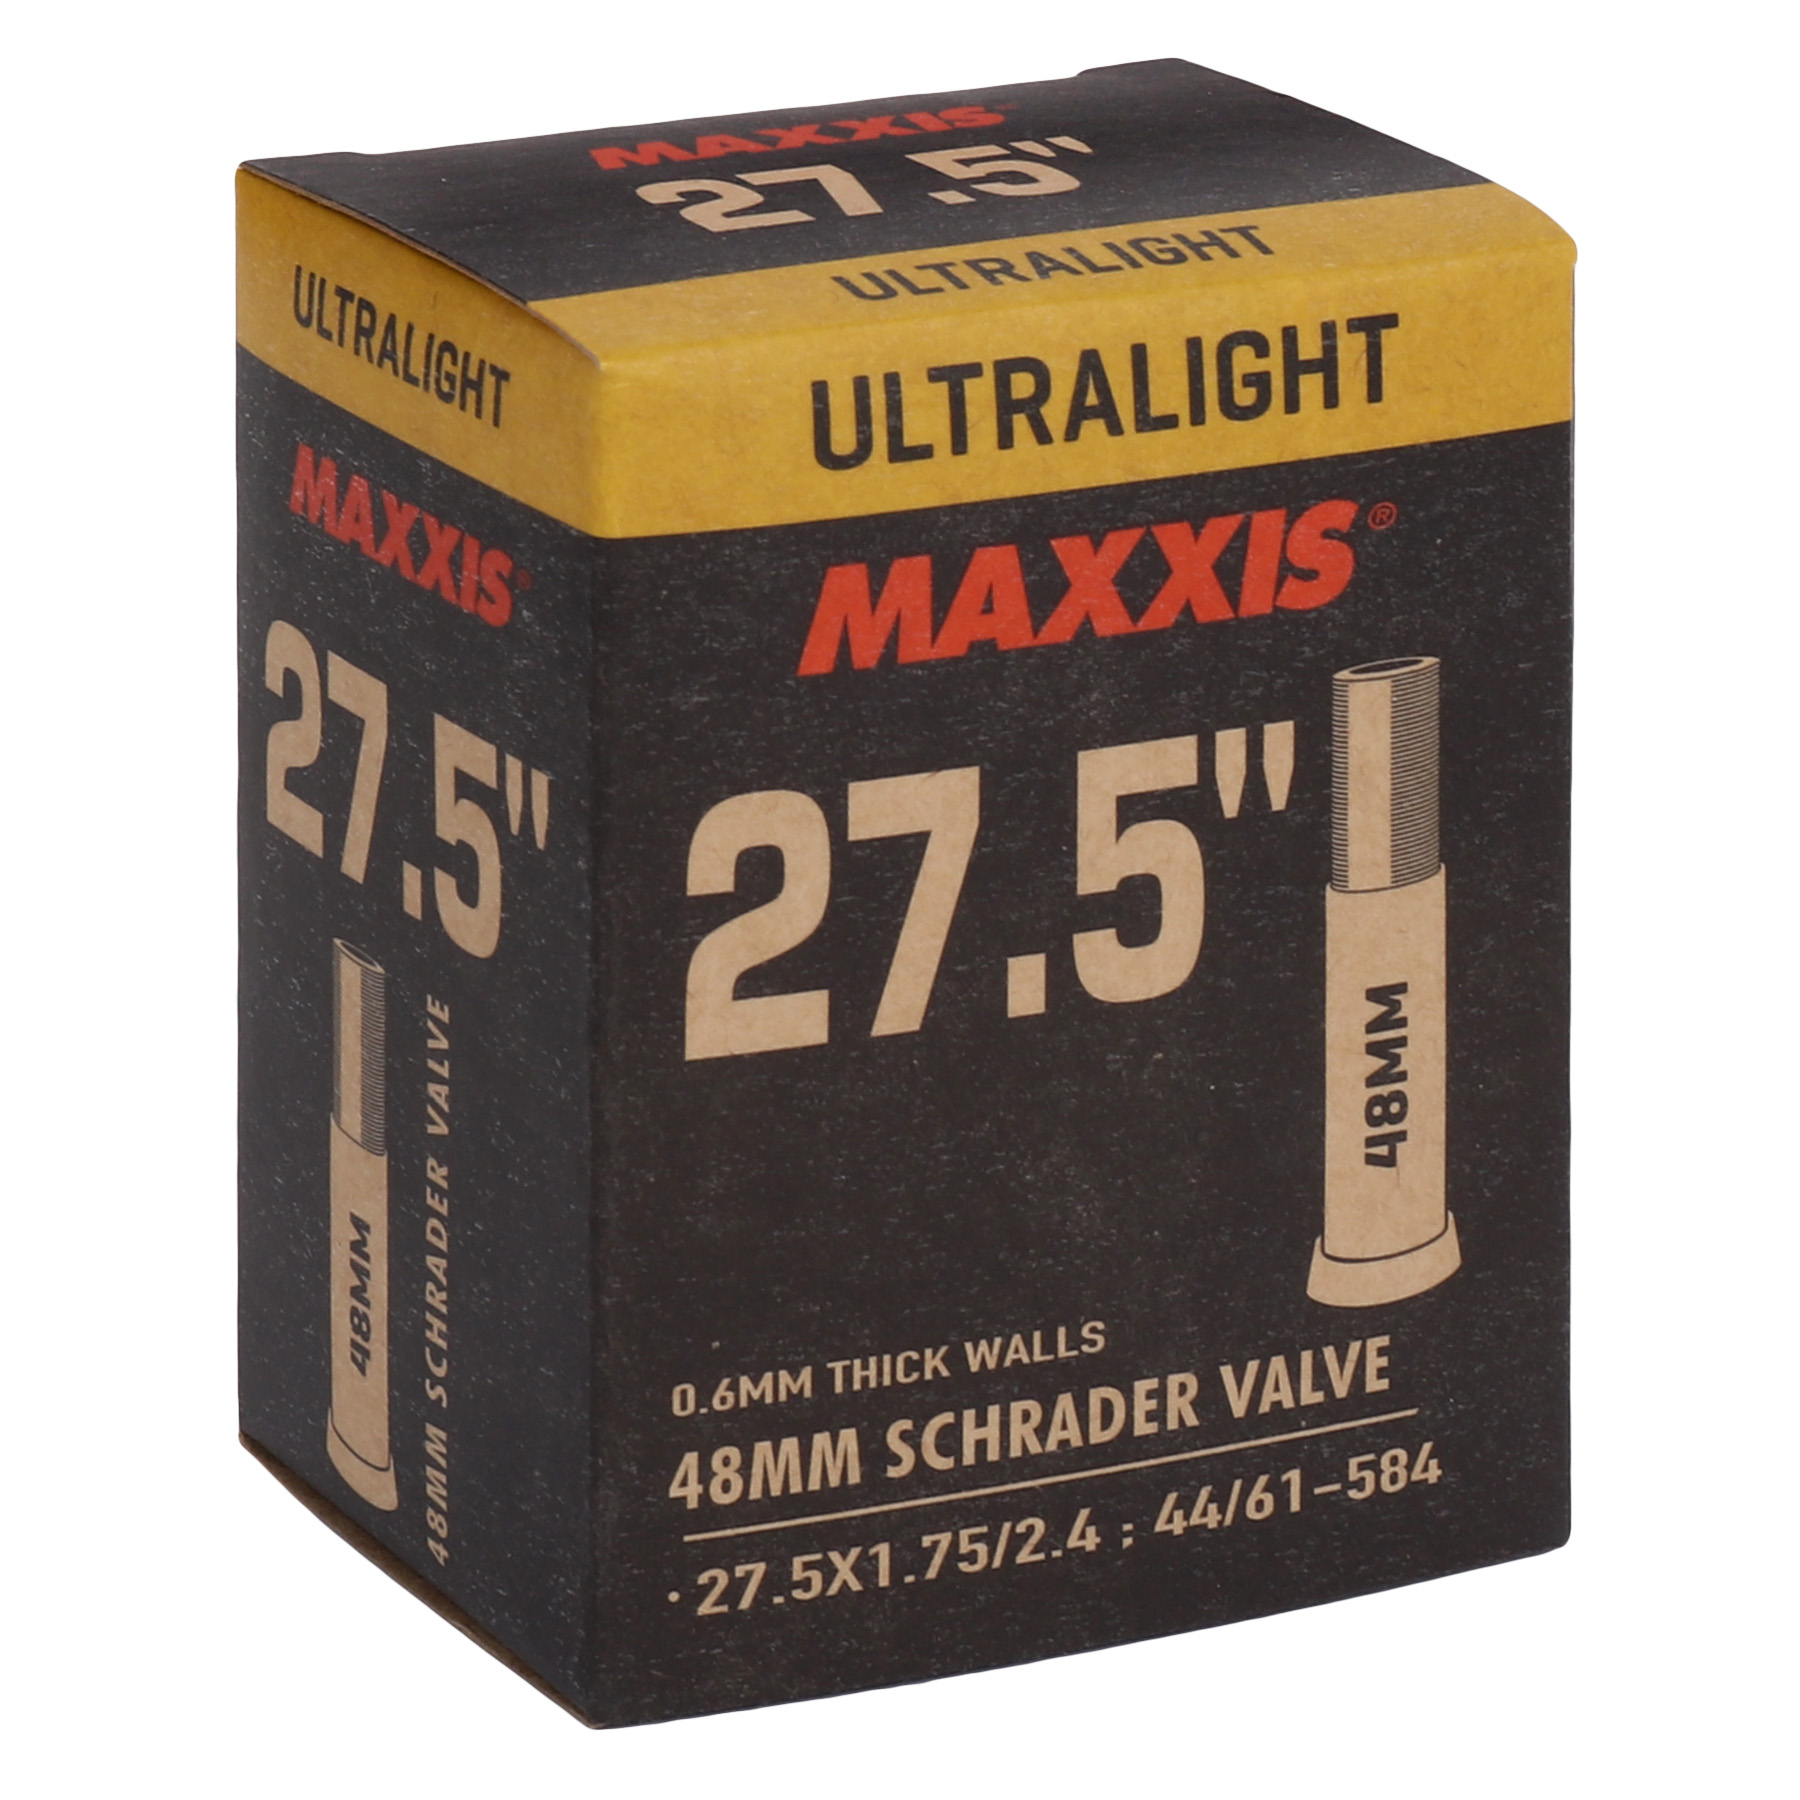 Picture of Maxxis UltraLight MTB Tube - 27.5x1.75-2.4 inches - Schrader - 48mm